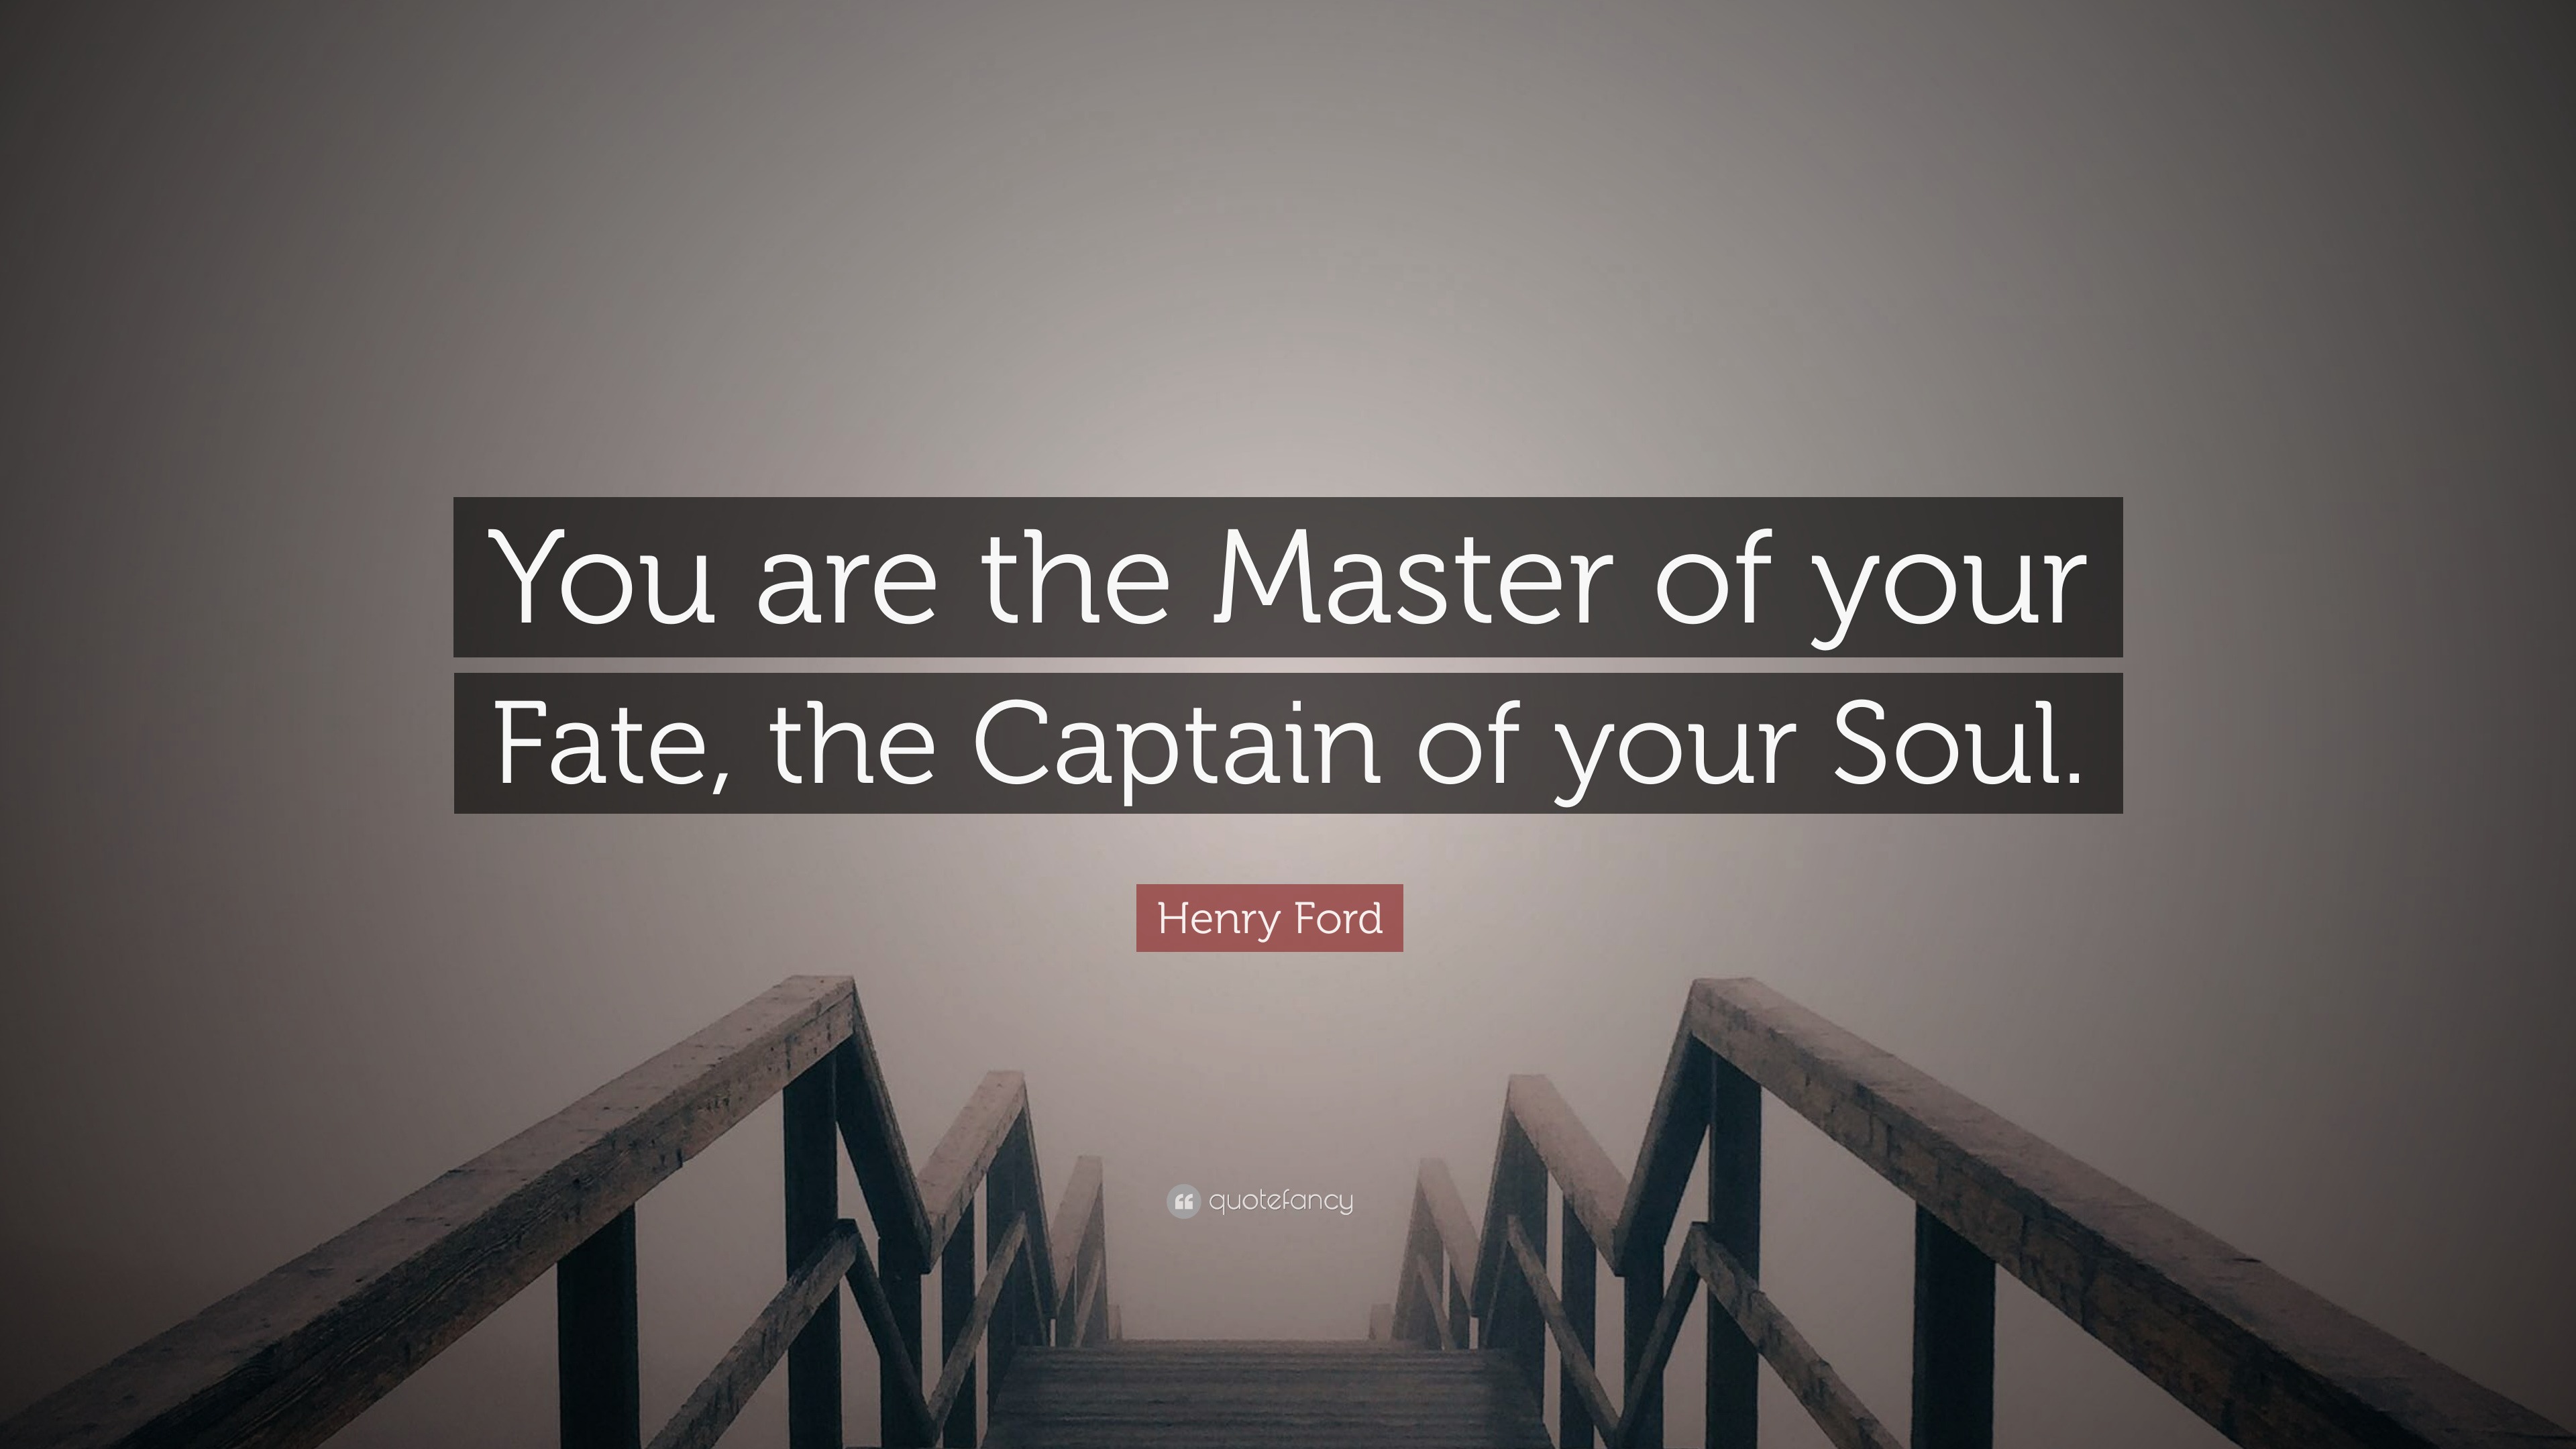 Henry Ford Quote: “You are the Master of your Fate, the Captain of